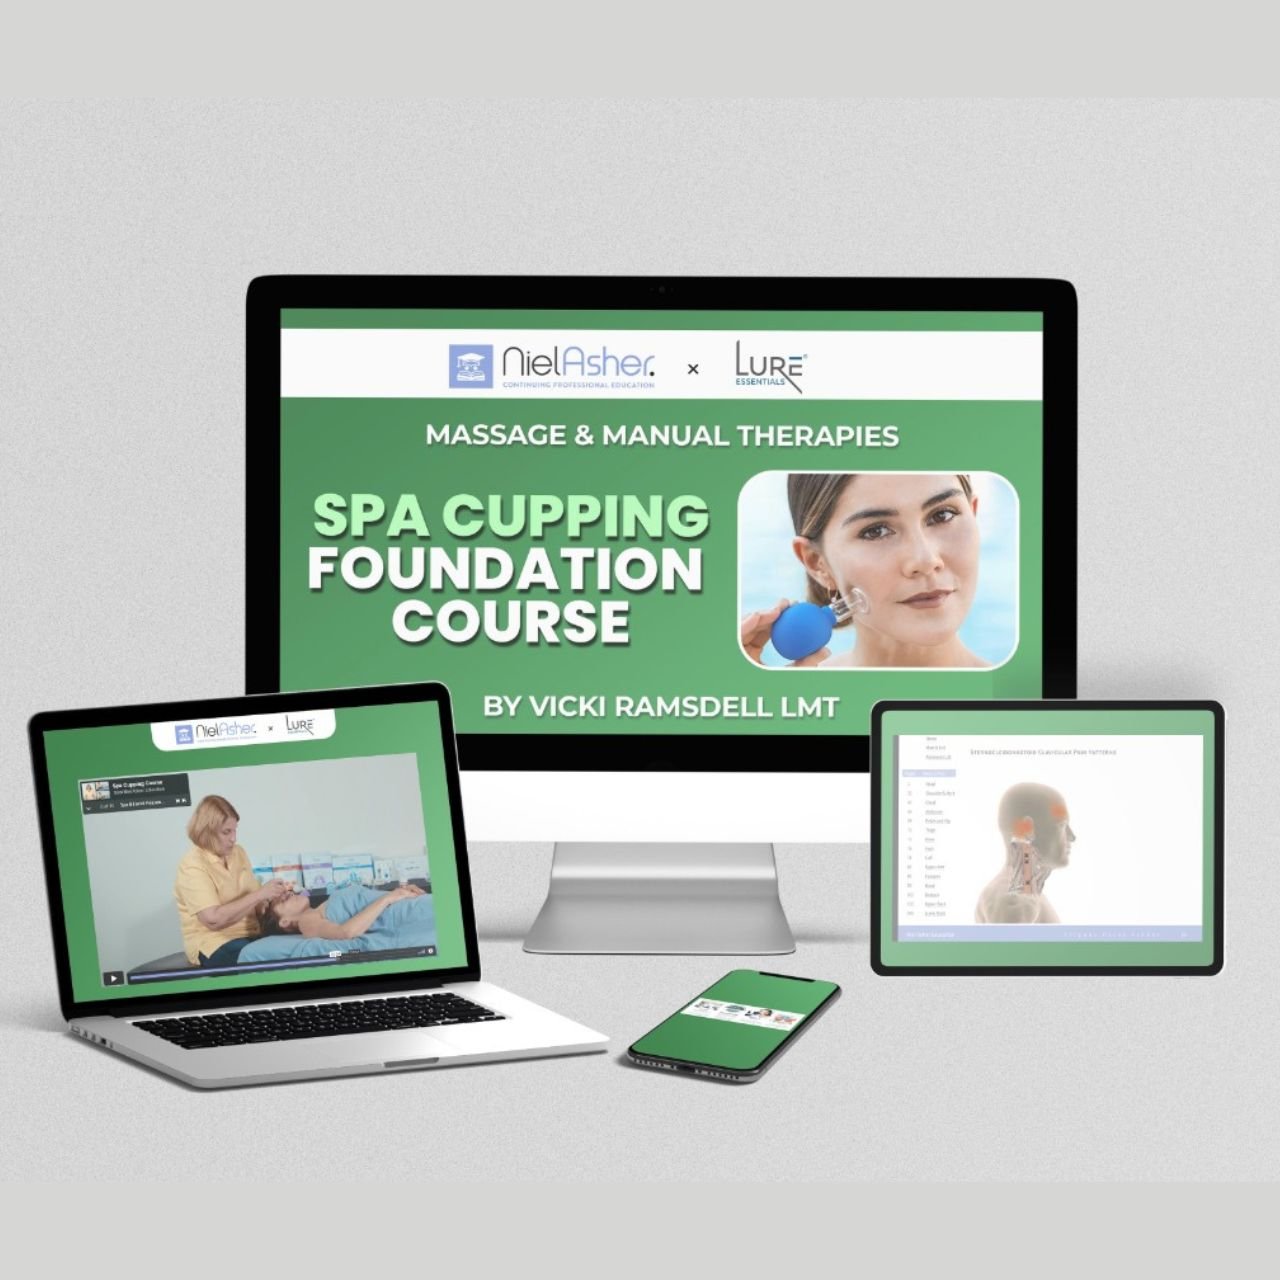 Spa Lymphatic Facial and Body Cupping CEU Course